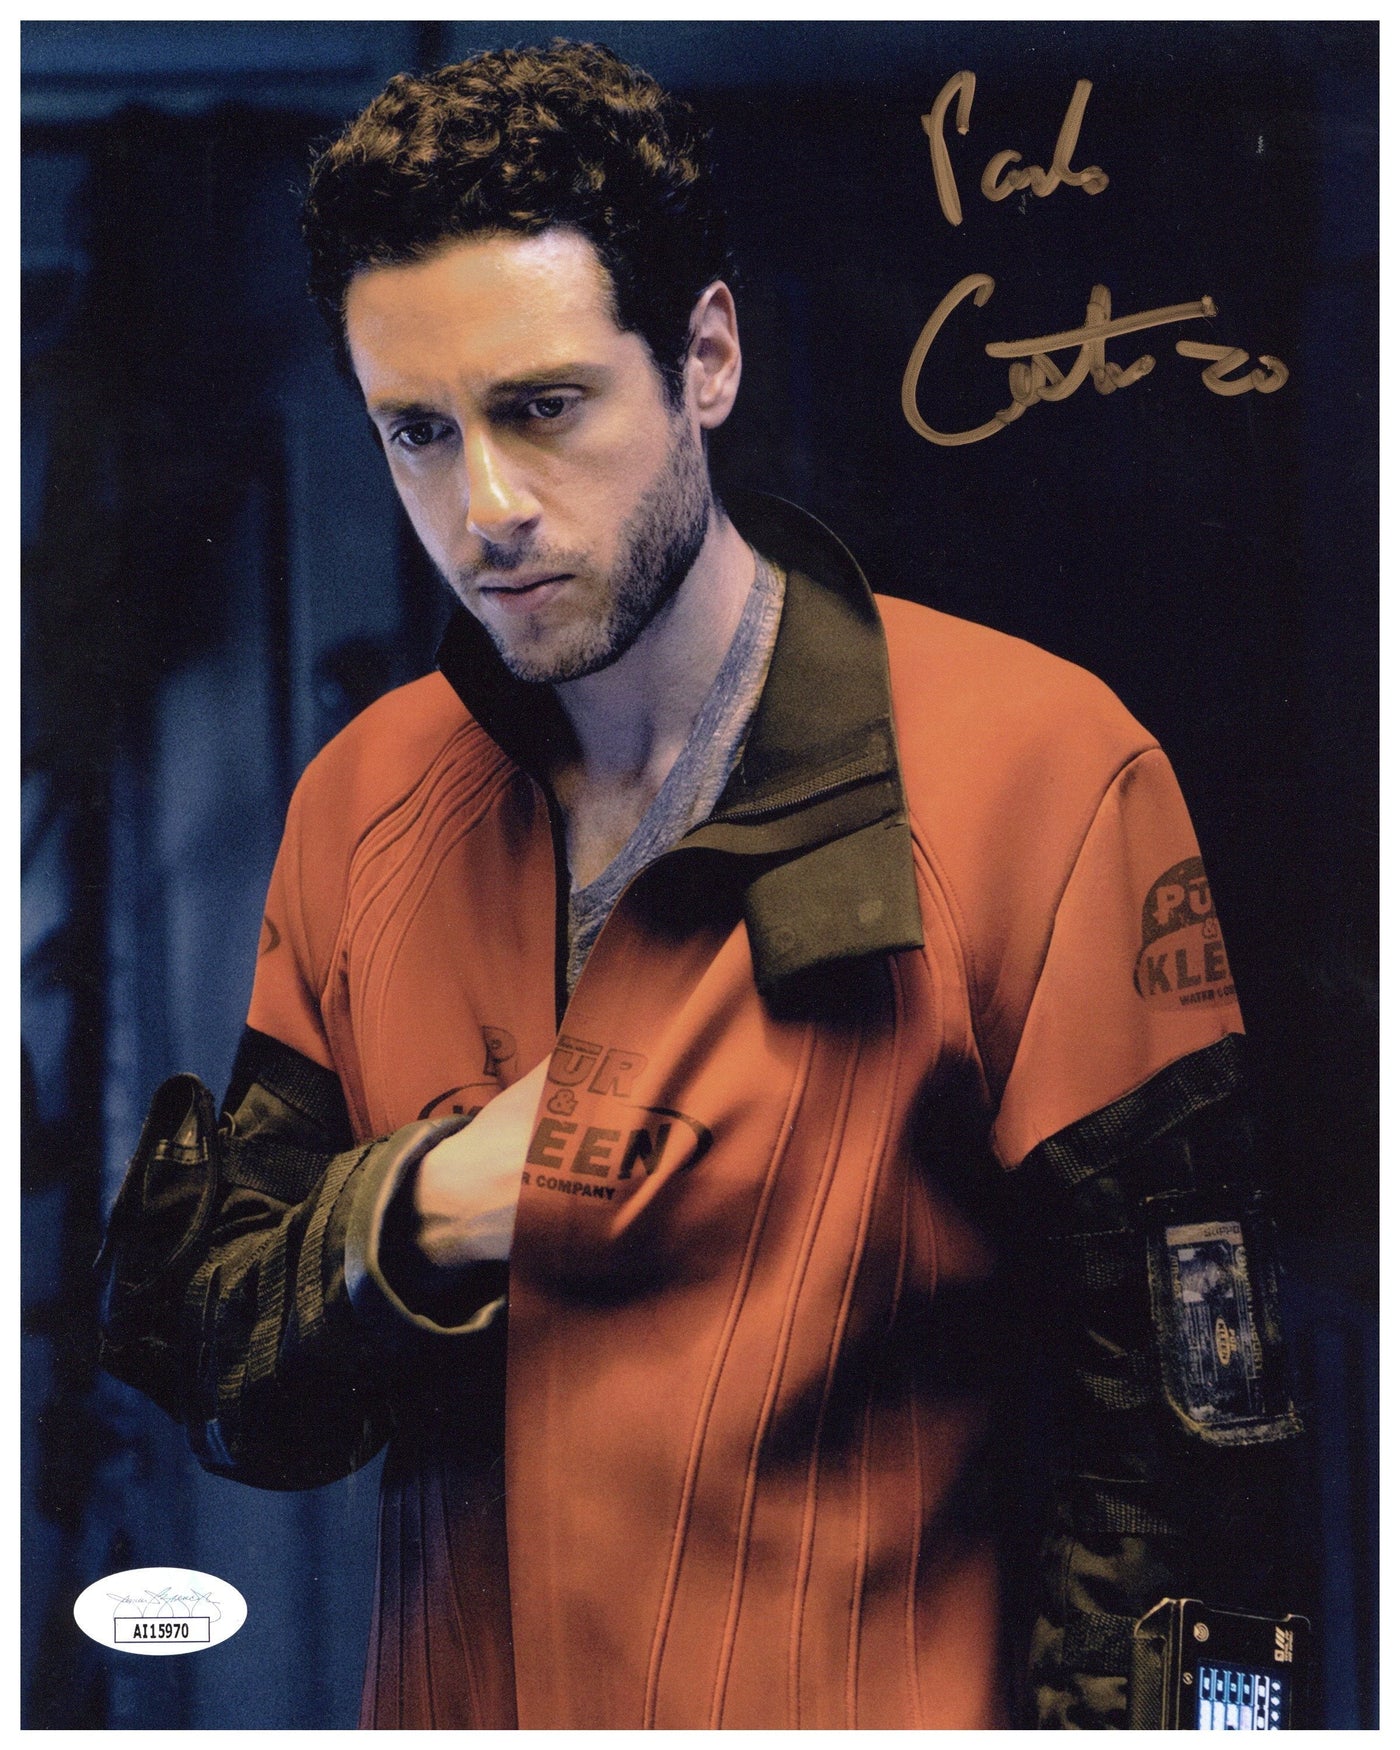 SPECIAL Paulo Costanzo Signed 8x10 Photo The Expanse JSA COA